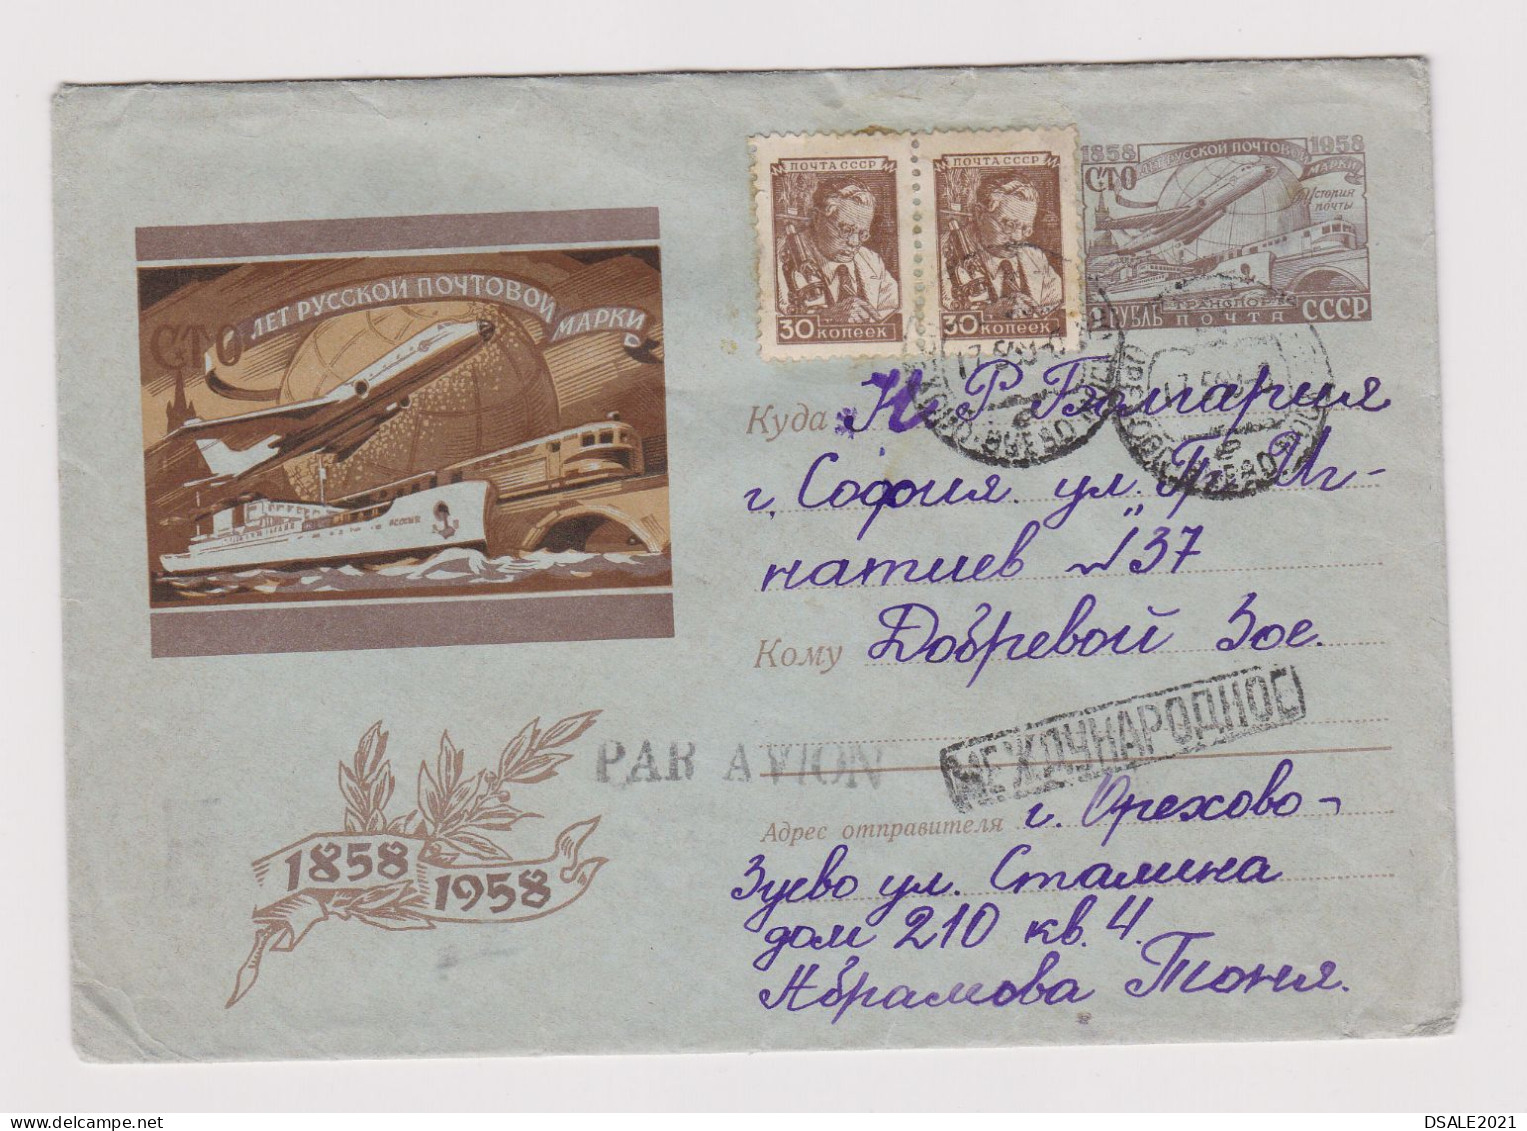 USSR Soviet Union Russia 1950s Postal Stationery Cover PSE Entier, Airplane, Ship, Train, W/Topic Stamps To Bulgaria 874 - 1950-59